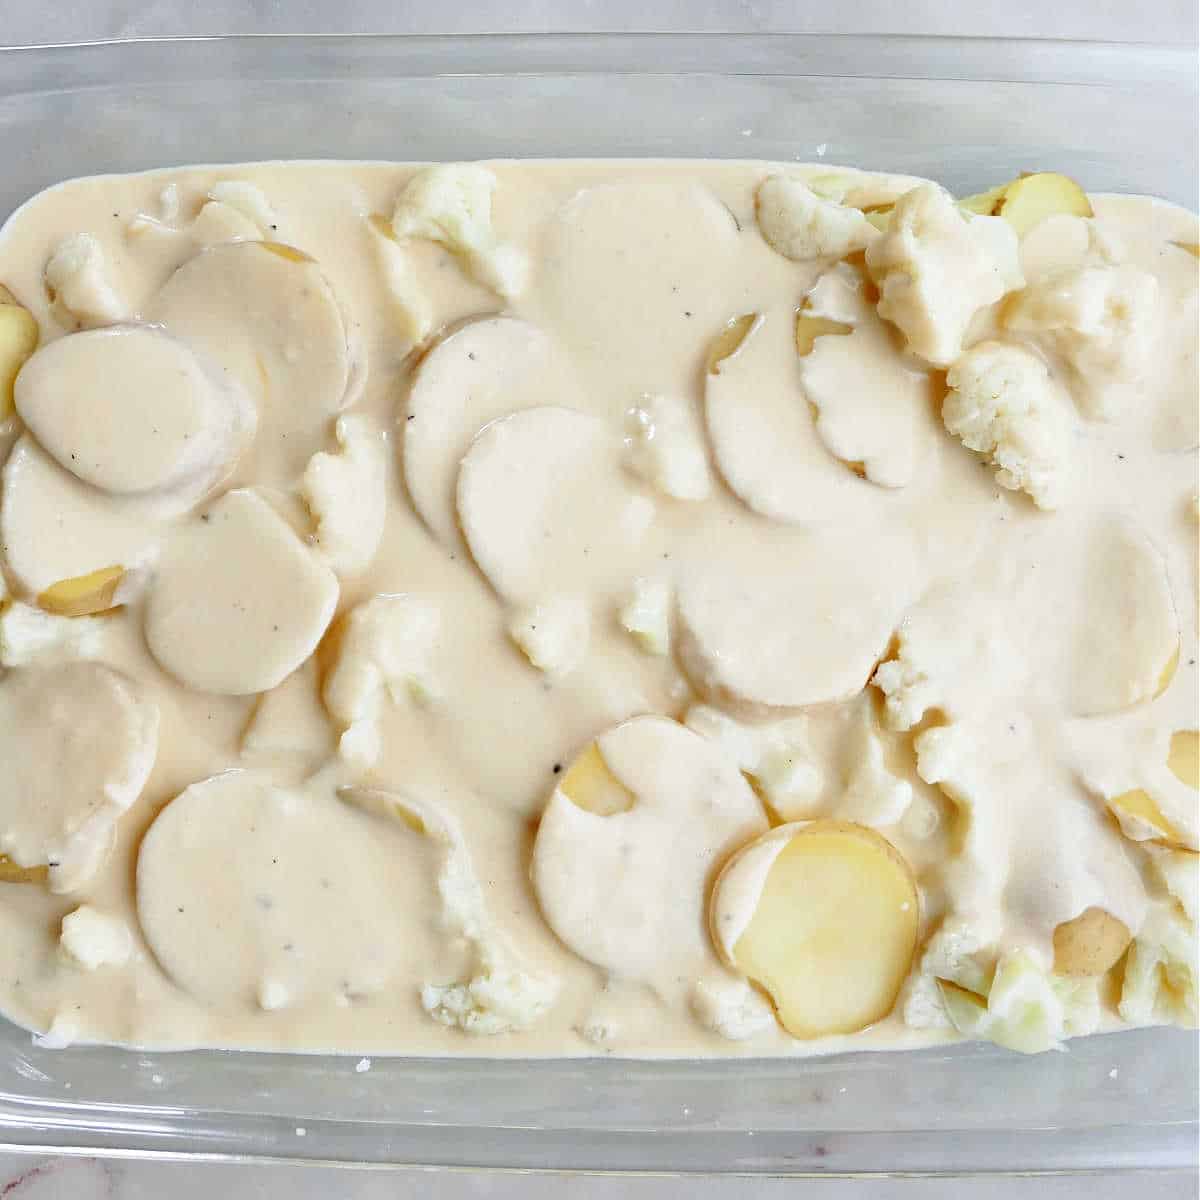 cauliflower and potatoes covered with a creamy sauce in a casserole dish